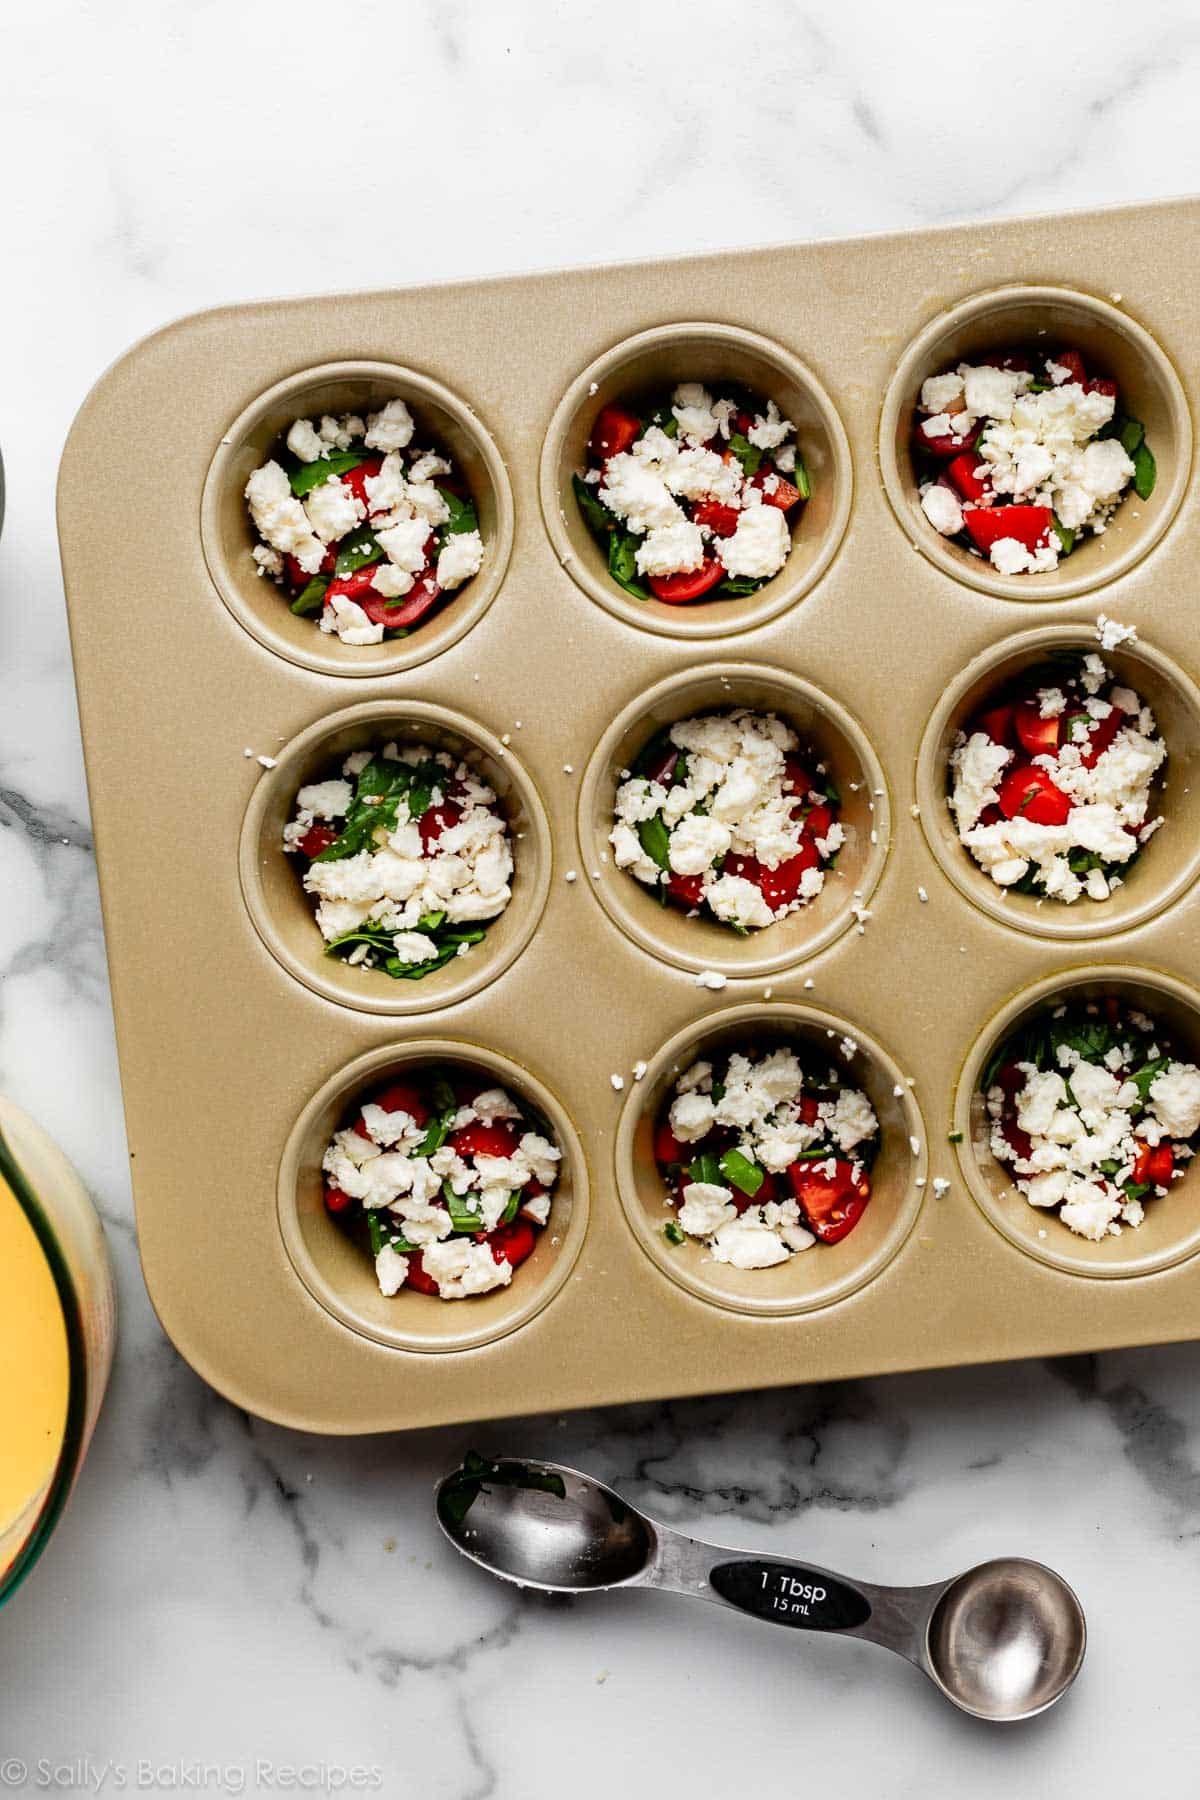 feta cheese, red pepper, and spinach piled in muffin pan.